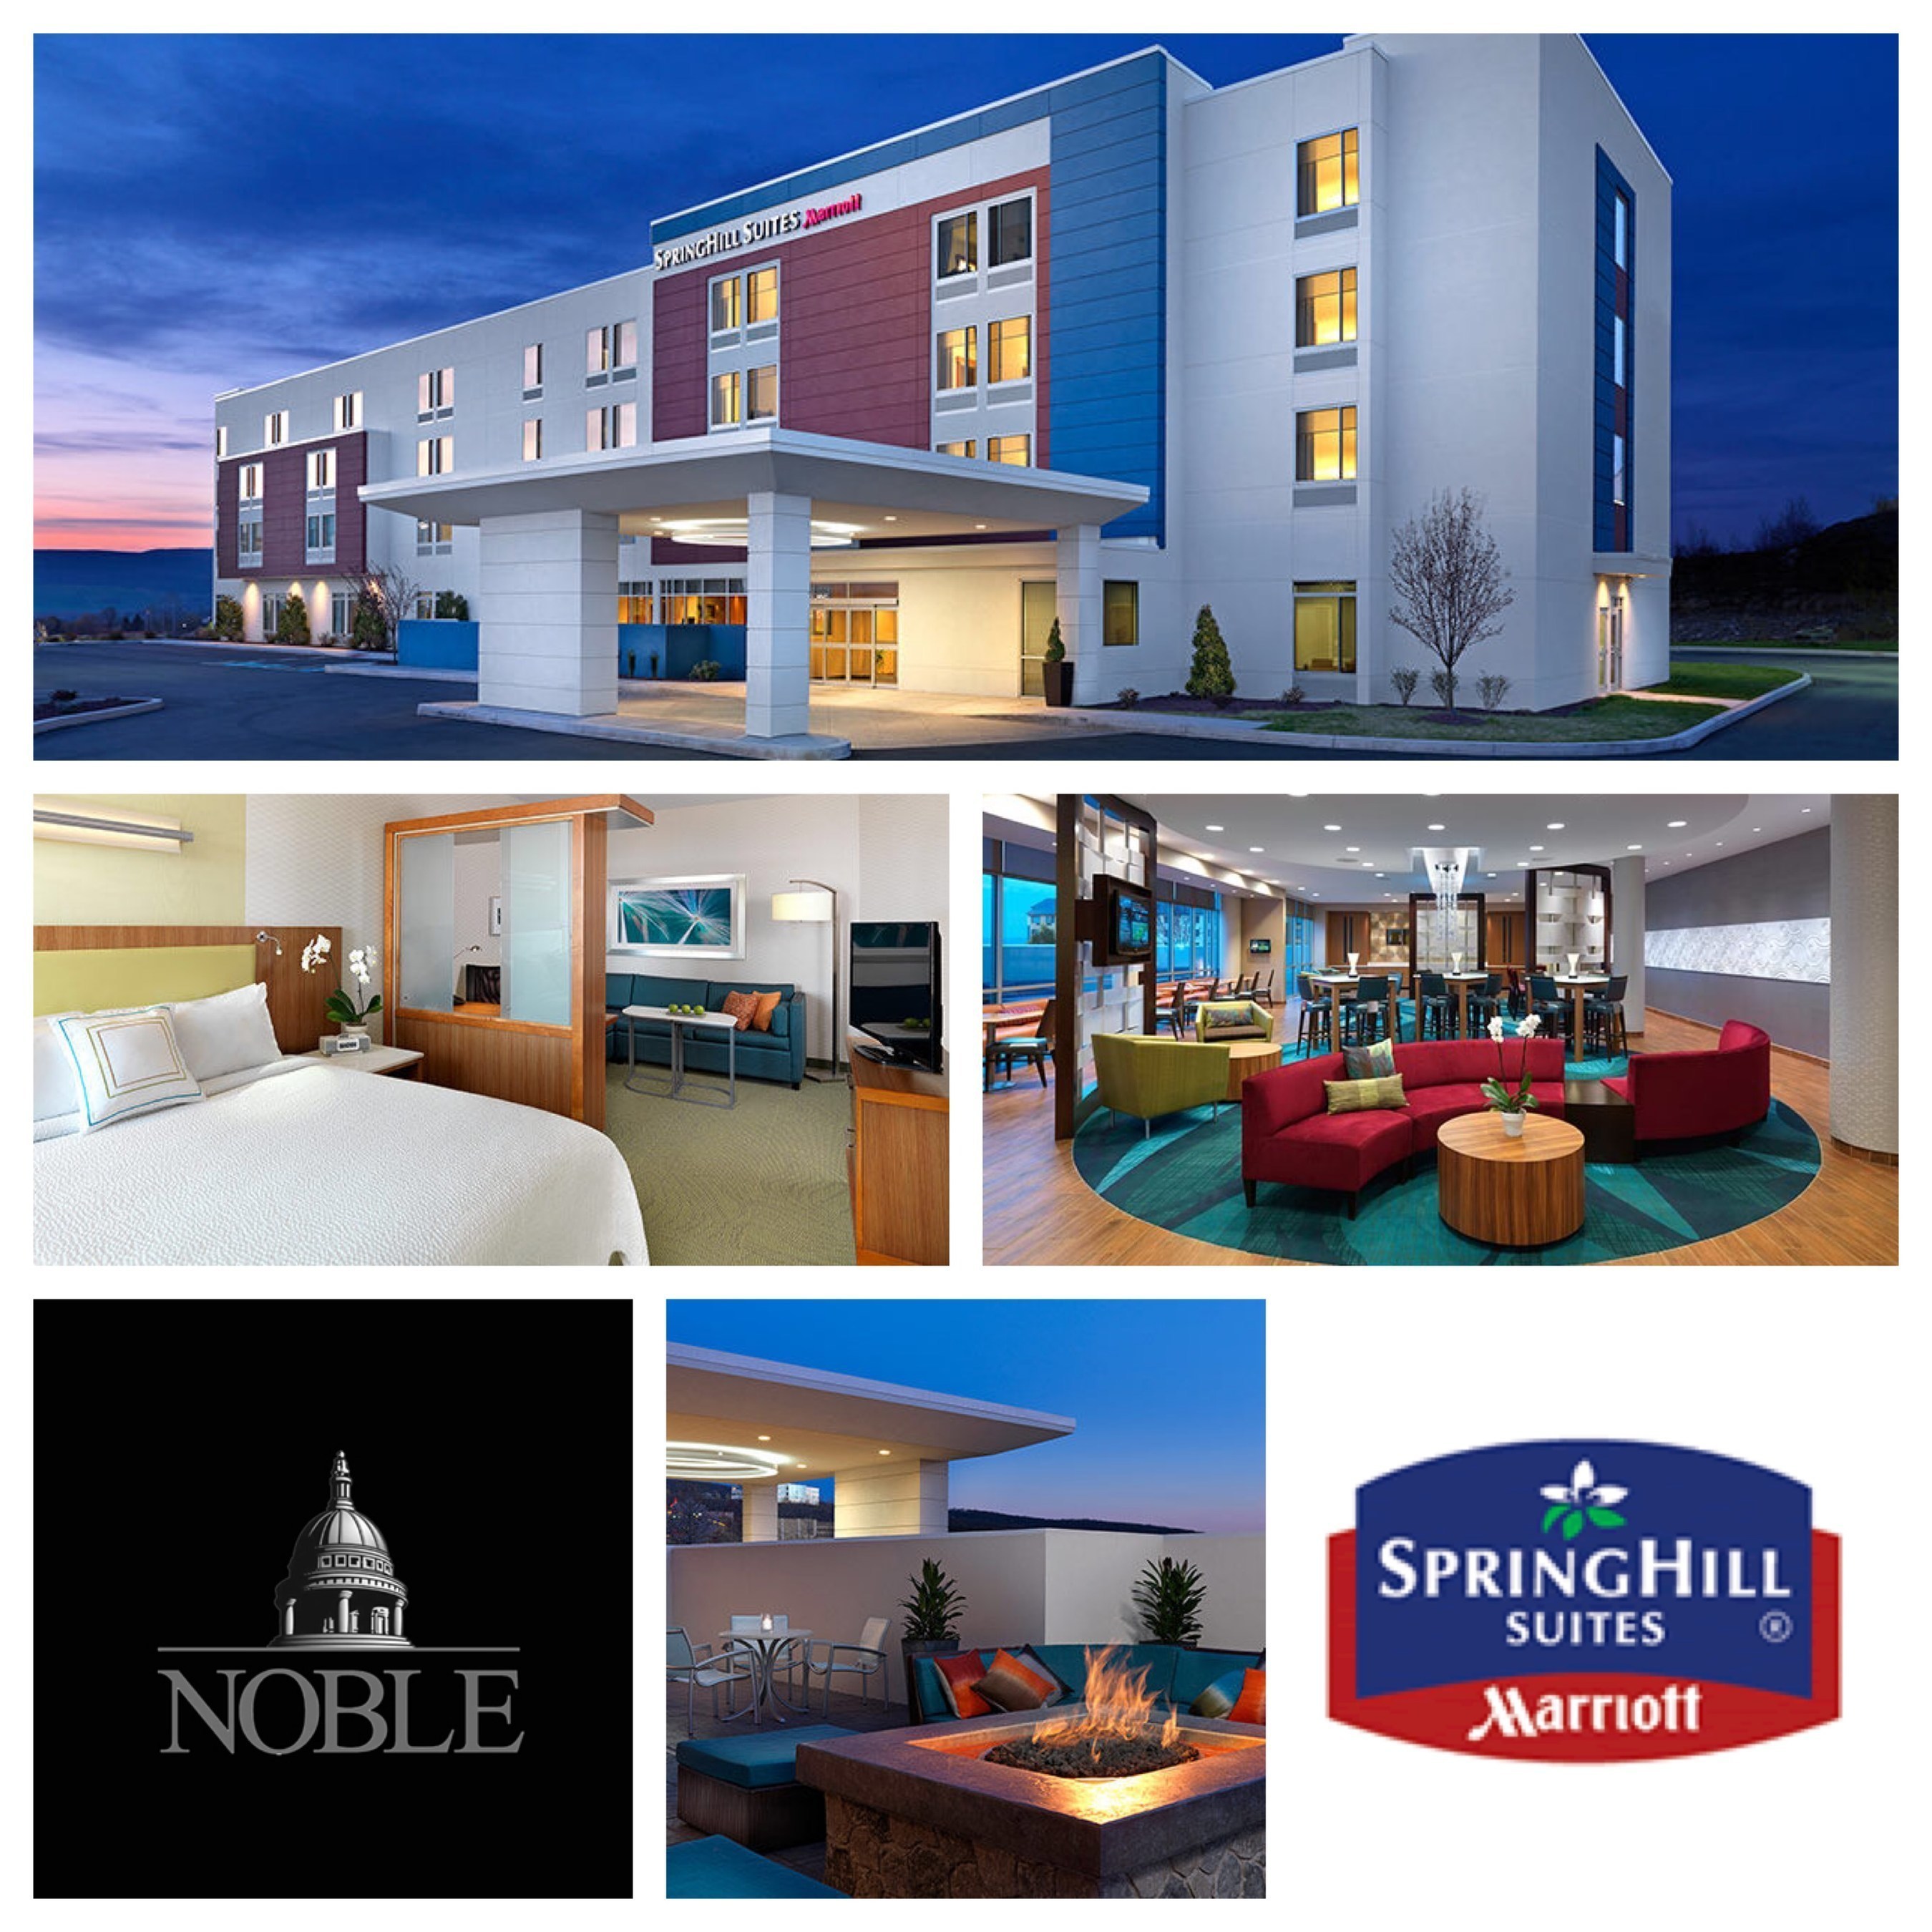 Noble Investment Group today announced the acquisition of the SpringHill Suites Houston Northwest. Located within the Chasewood Technology Park, just steps from the Hewlett Packard Campuses and Lone Star College - University Park, the newly built property is the second Houston-area hotel in Noble's portfolio.